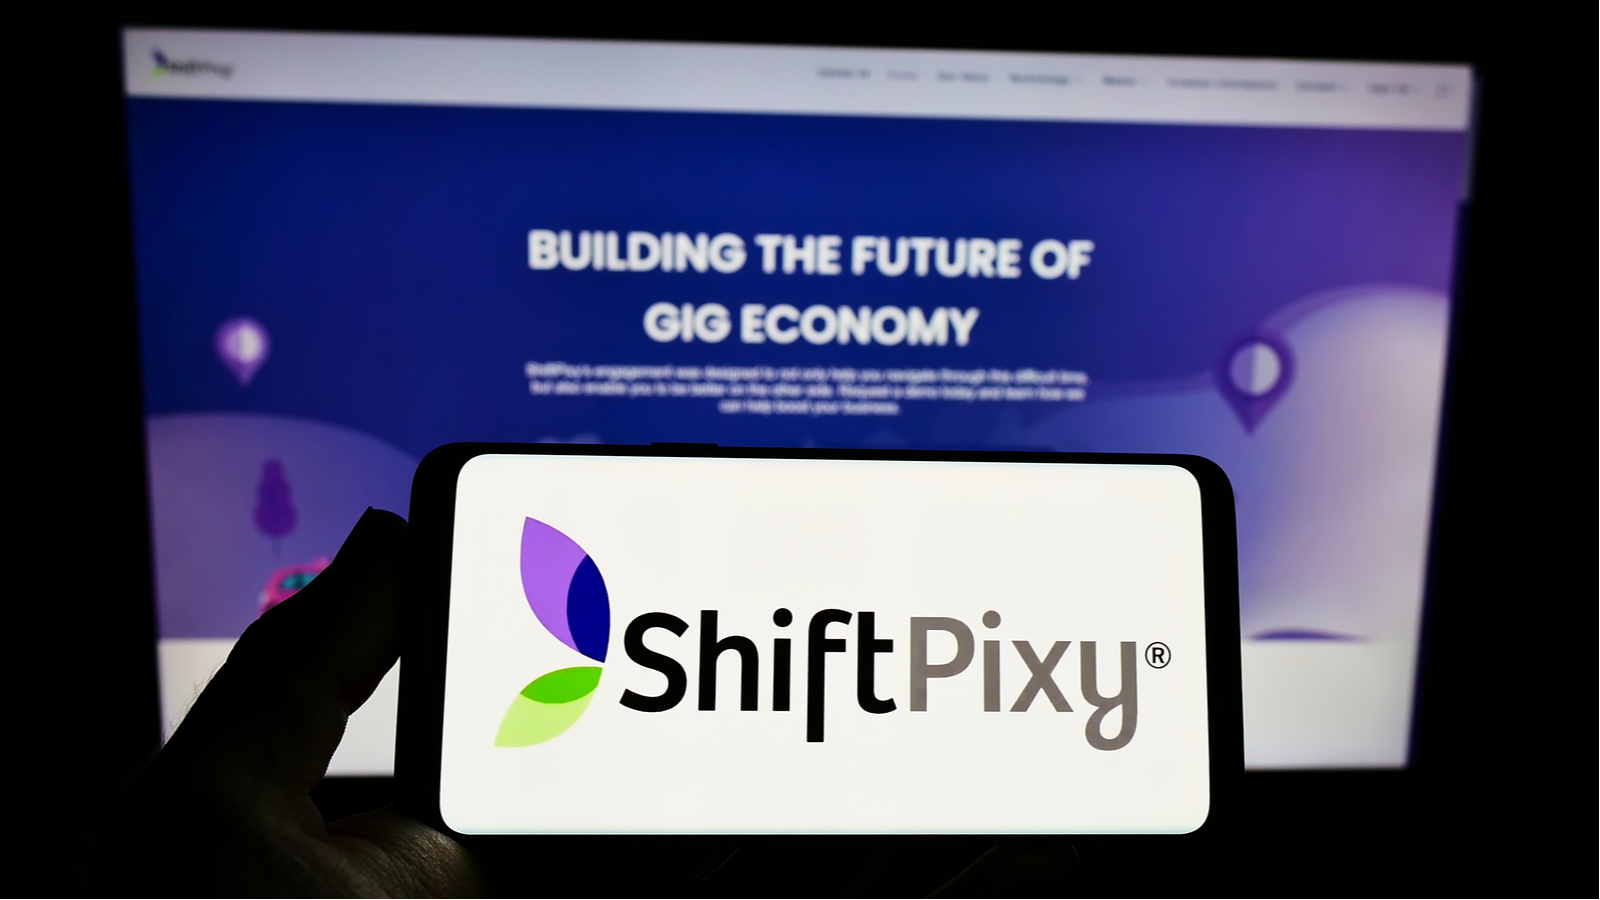 ShiftPixy (PIXY Stock) logo displayed on a smartphone screen with company website on computer monitor behind smartphone